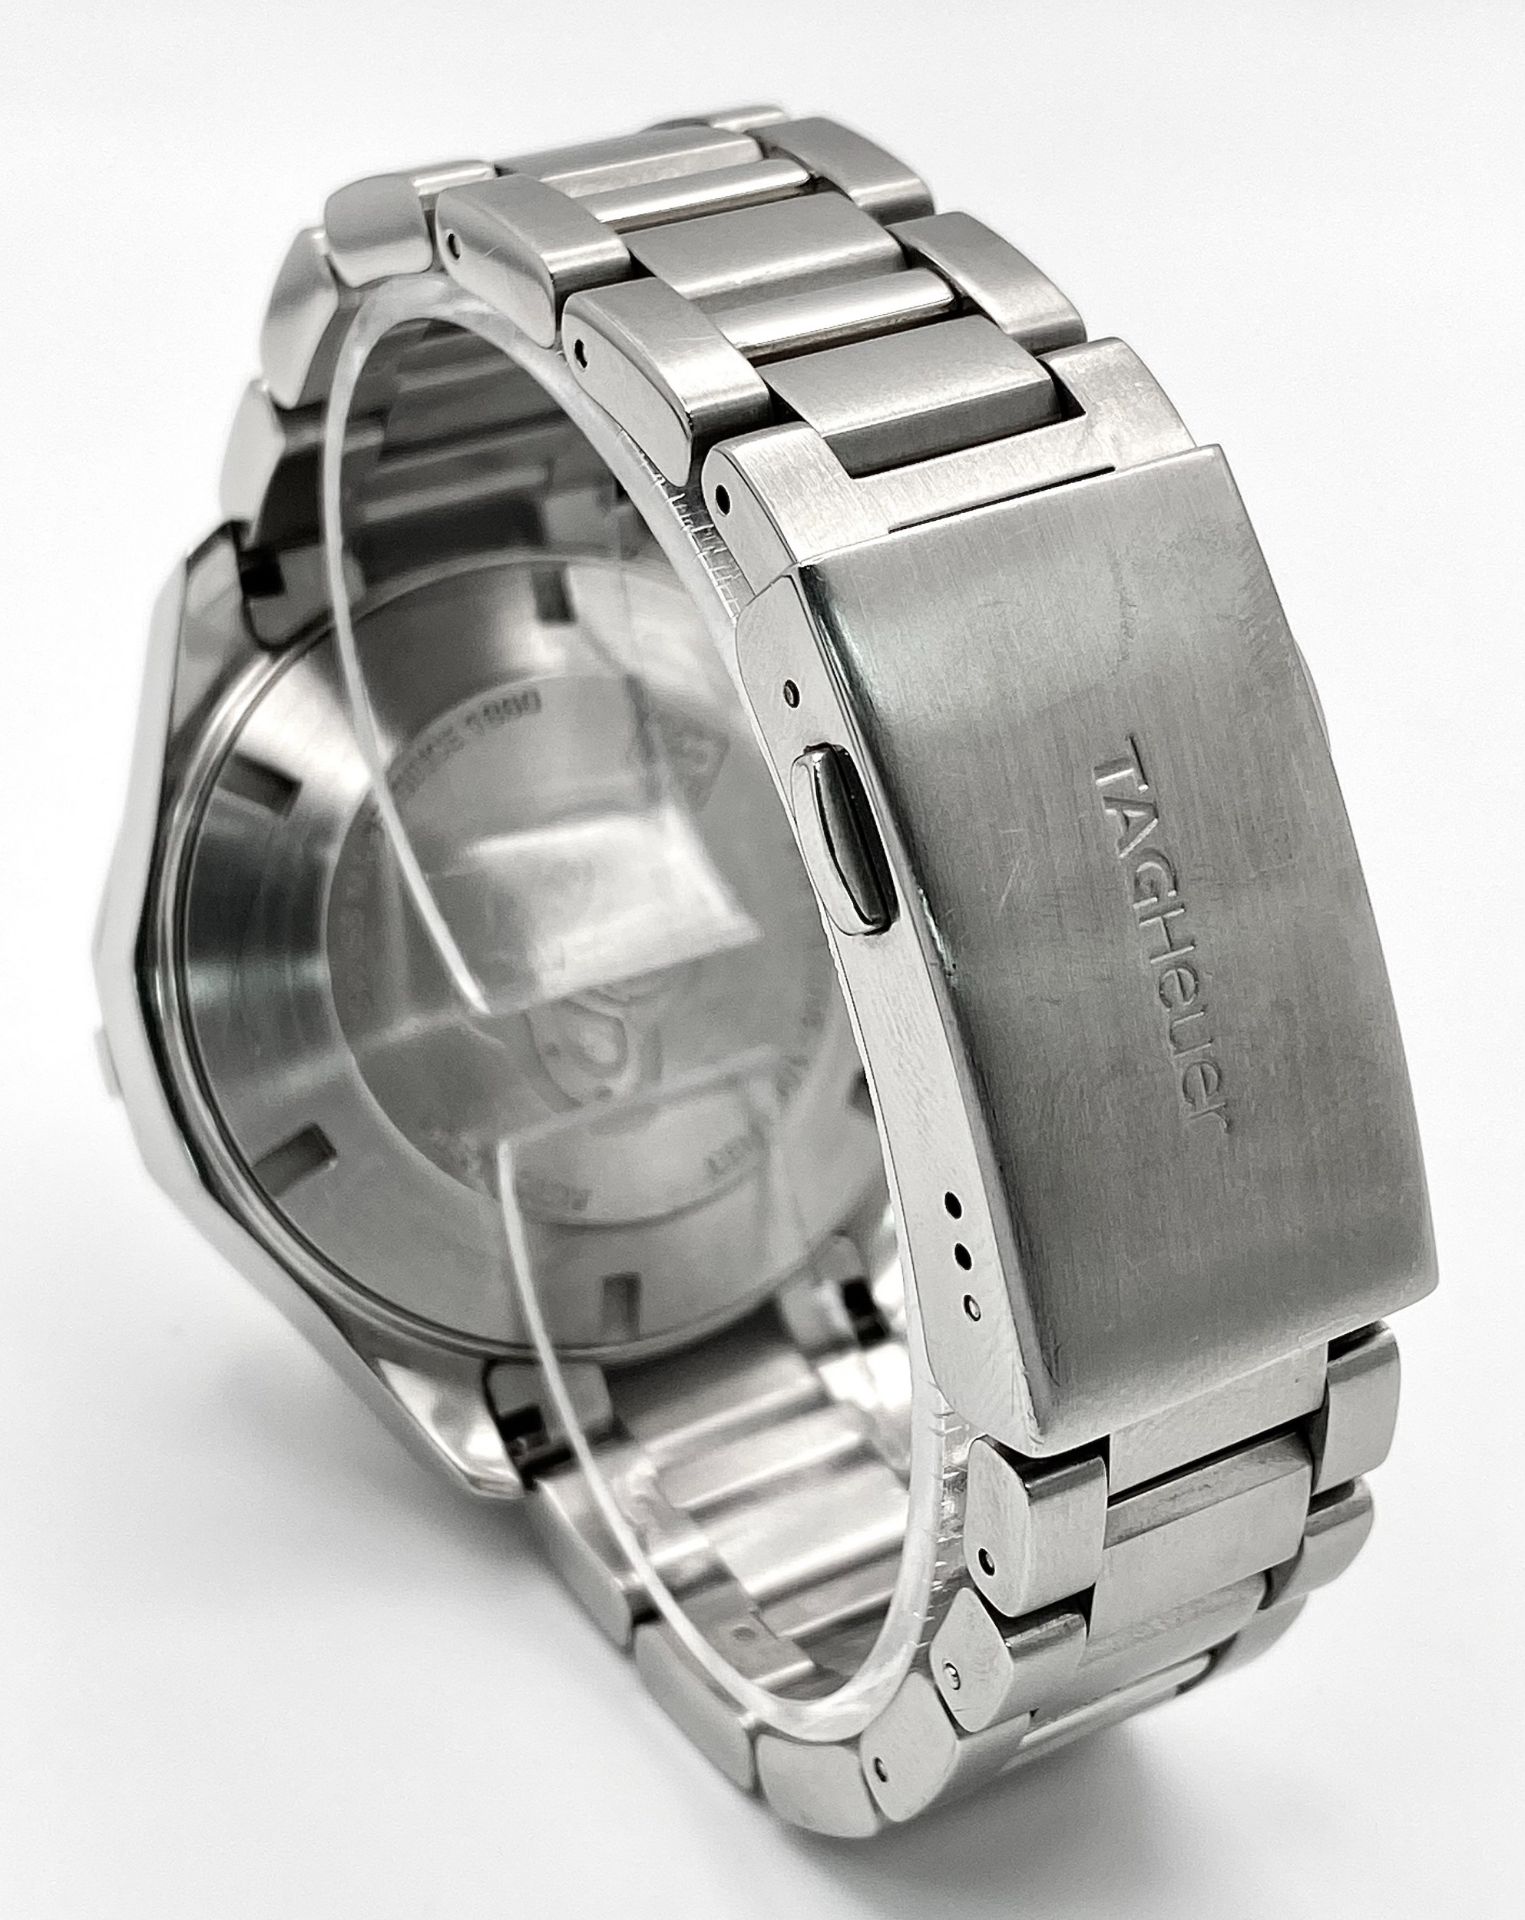 A TAG HEUER AQUARACER CALIBRE 16 AUTOMATIC GENTS WATCH - STAINLESS STEEL BRACELET AND CASE - 44MM. - Image 6 of 9